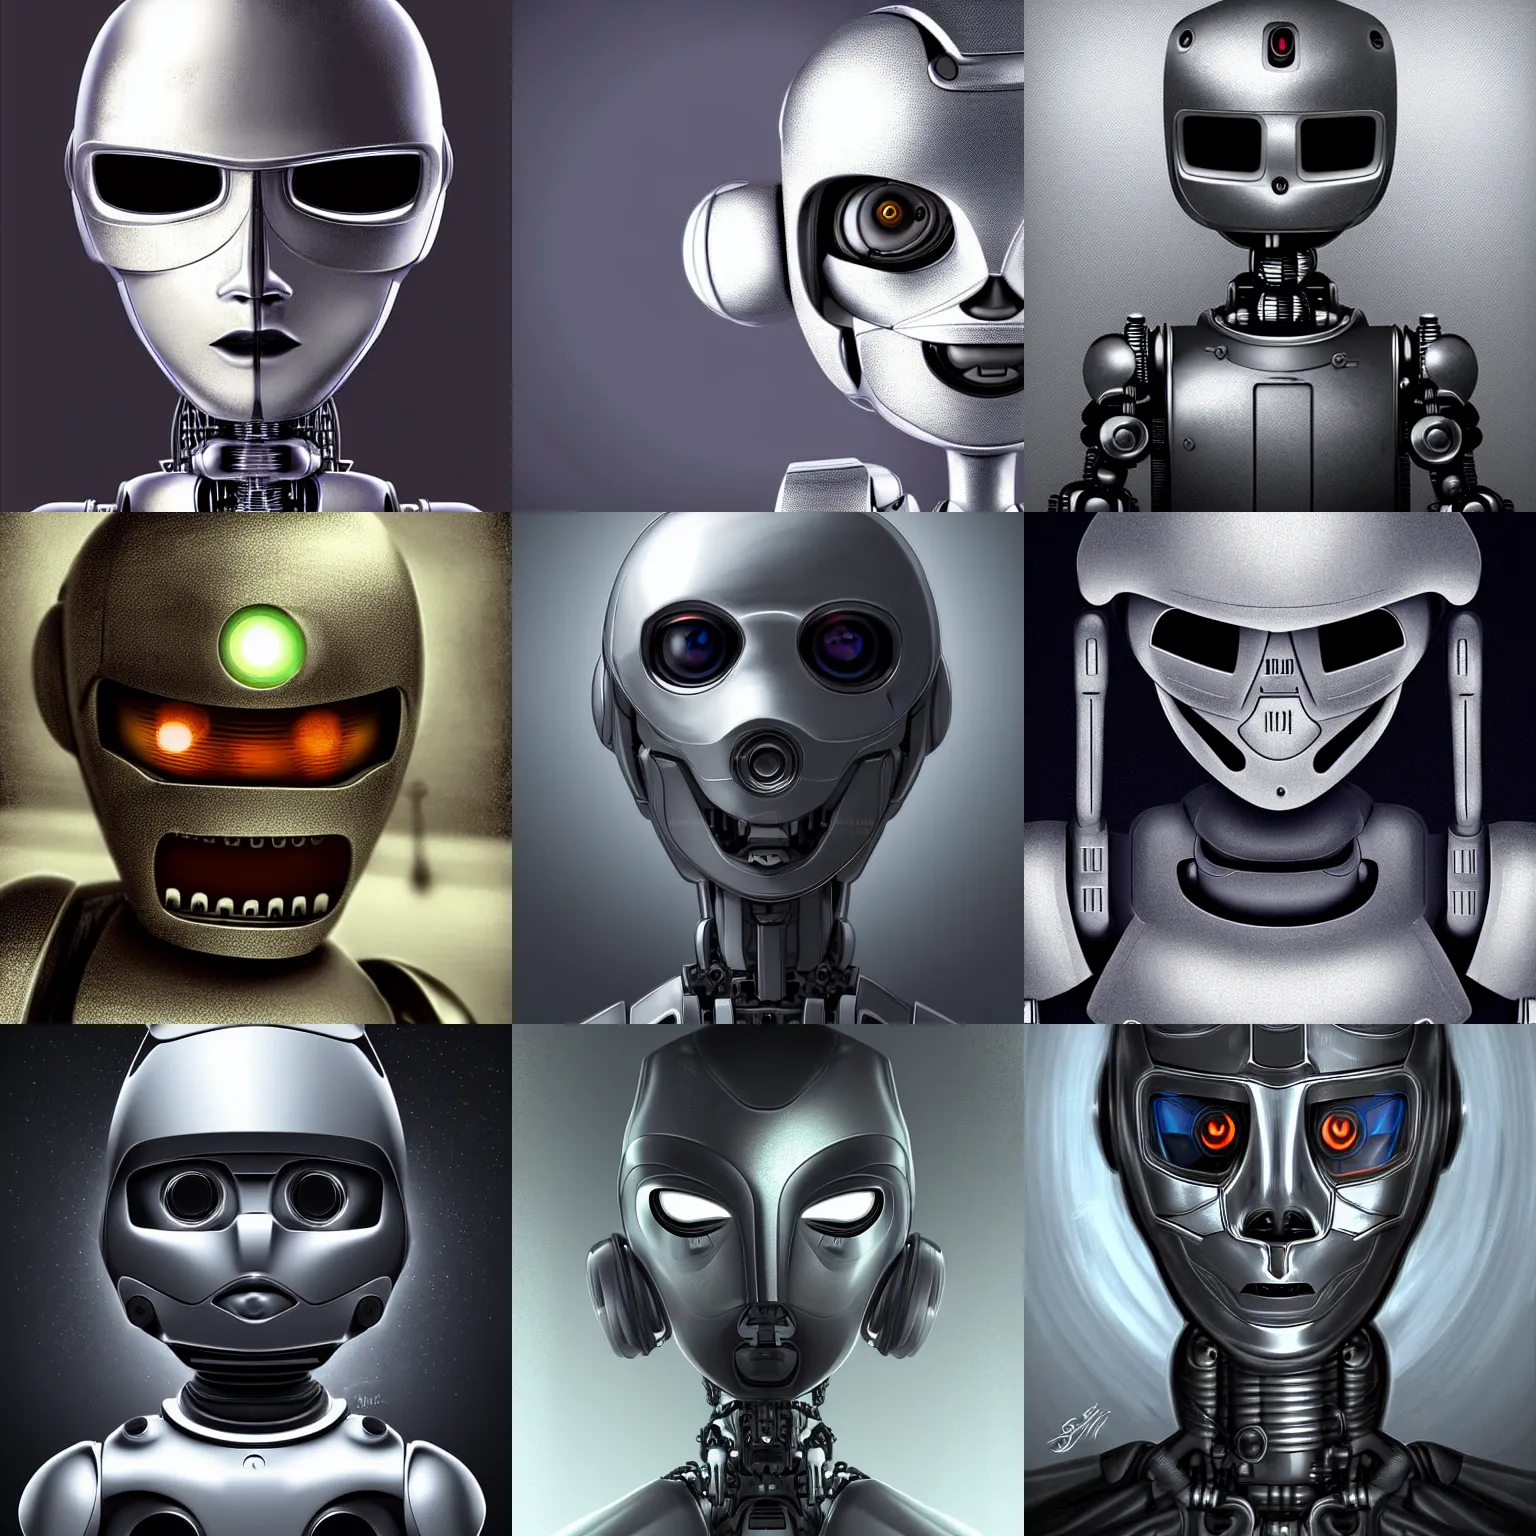 Prompt: Concept Digital Art Highly detailed Art Cute neutral Robot portrait with chrome and silver padding by Stephen Artist, mysterious background and dark fog, mysterious gaze, humanoid portrait